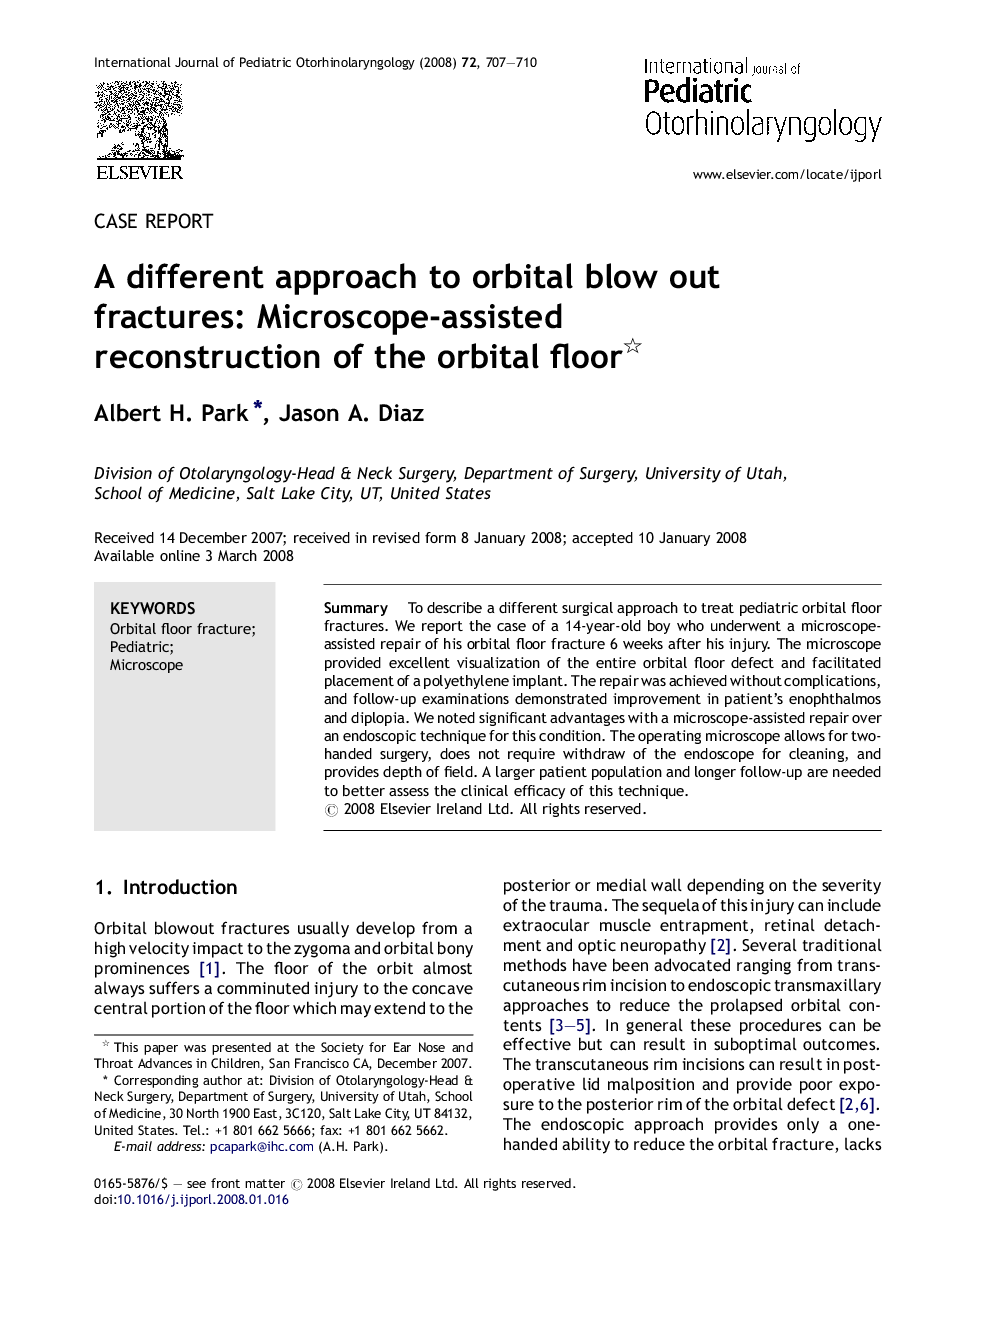 A different approach to orbital blow out fractures: Microscope-assisted reconstruction of the orbital floor